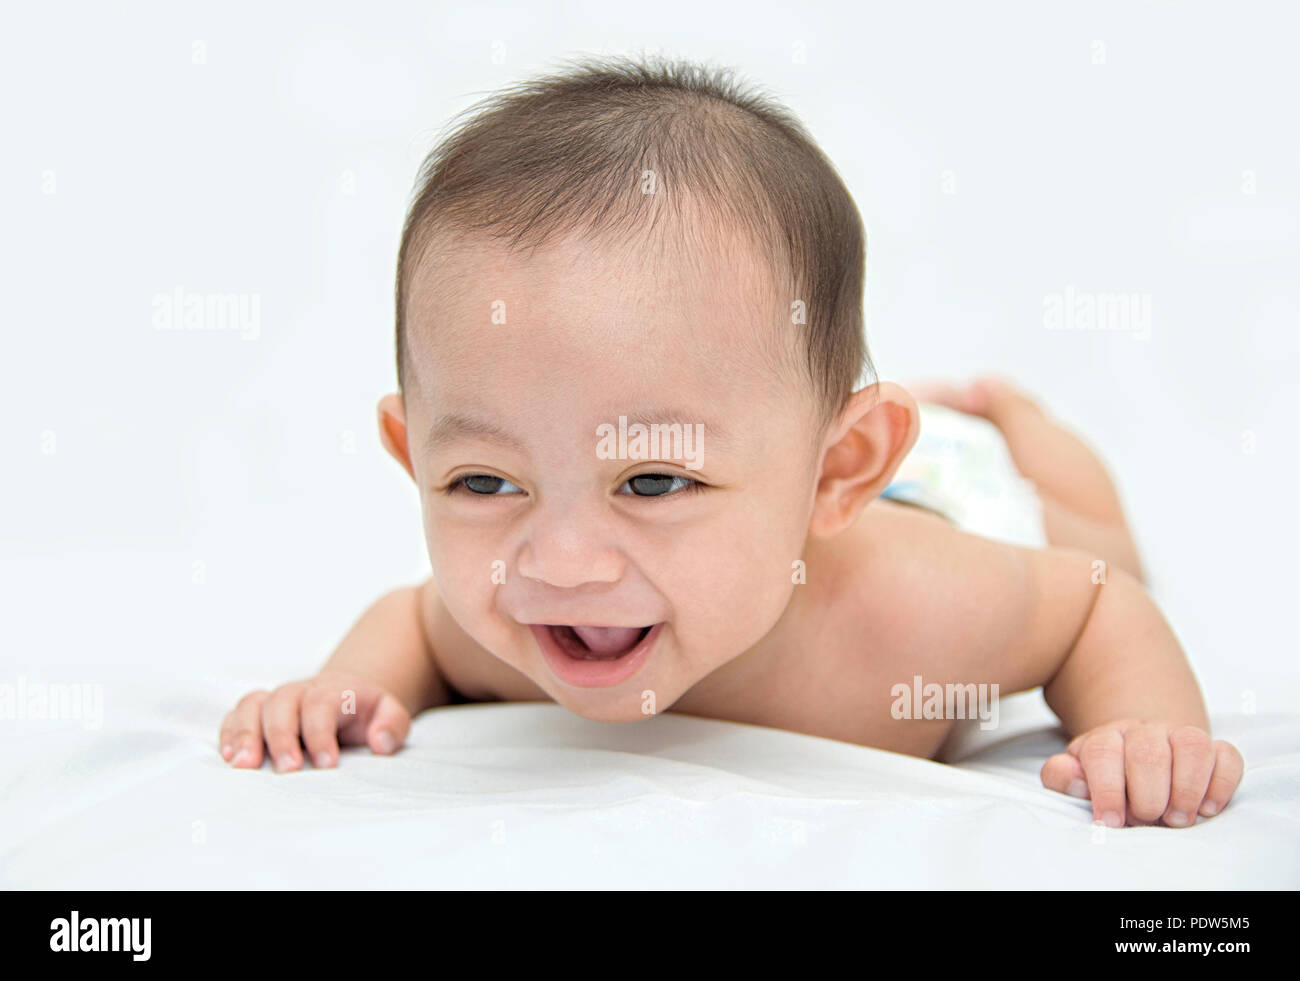 Happy baby. My firstborn child. He love to smile when I took his photo. Stock Photo